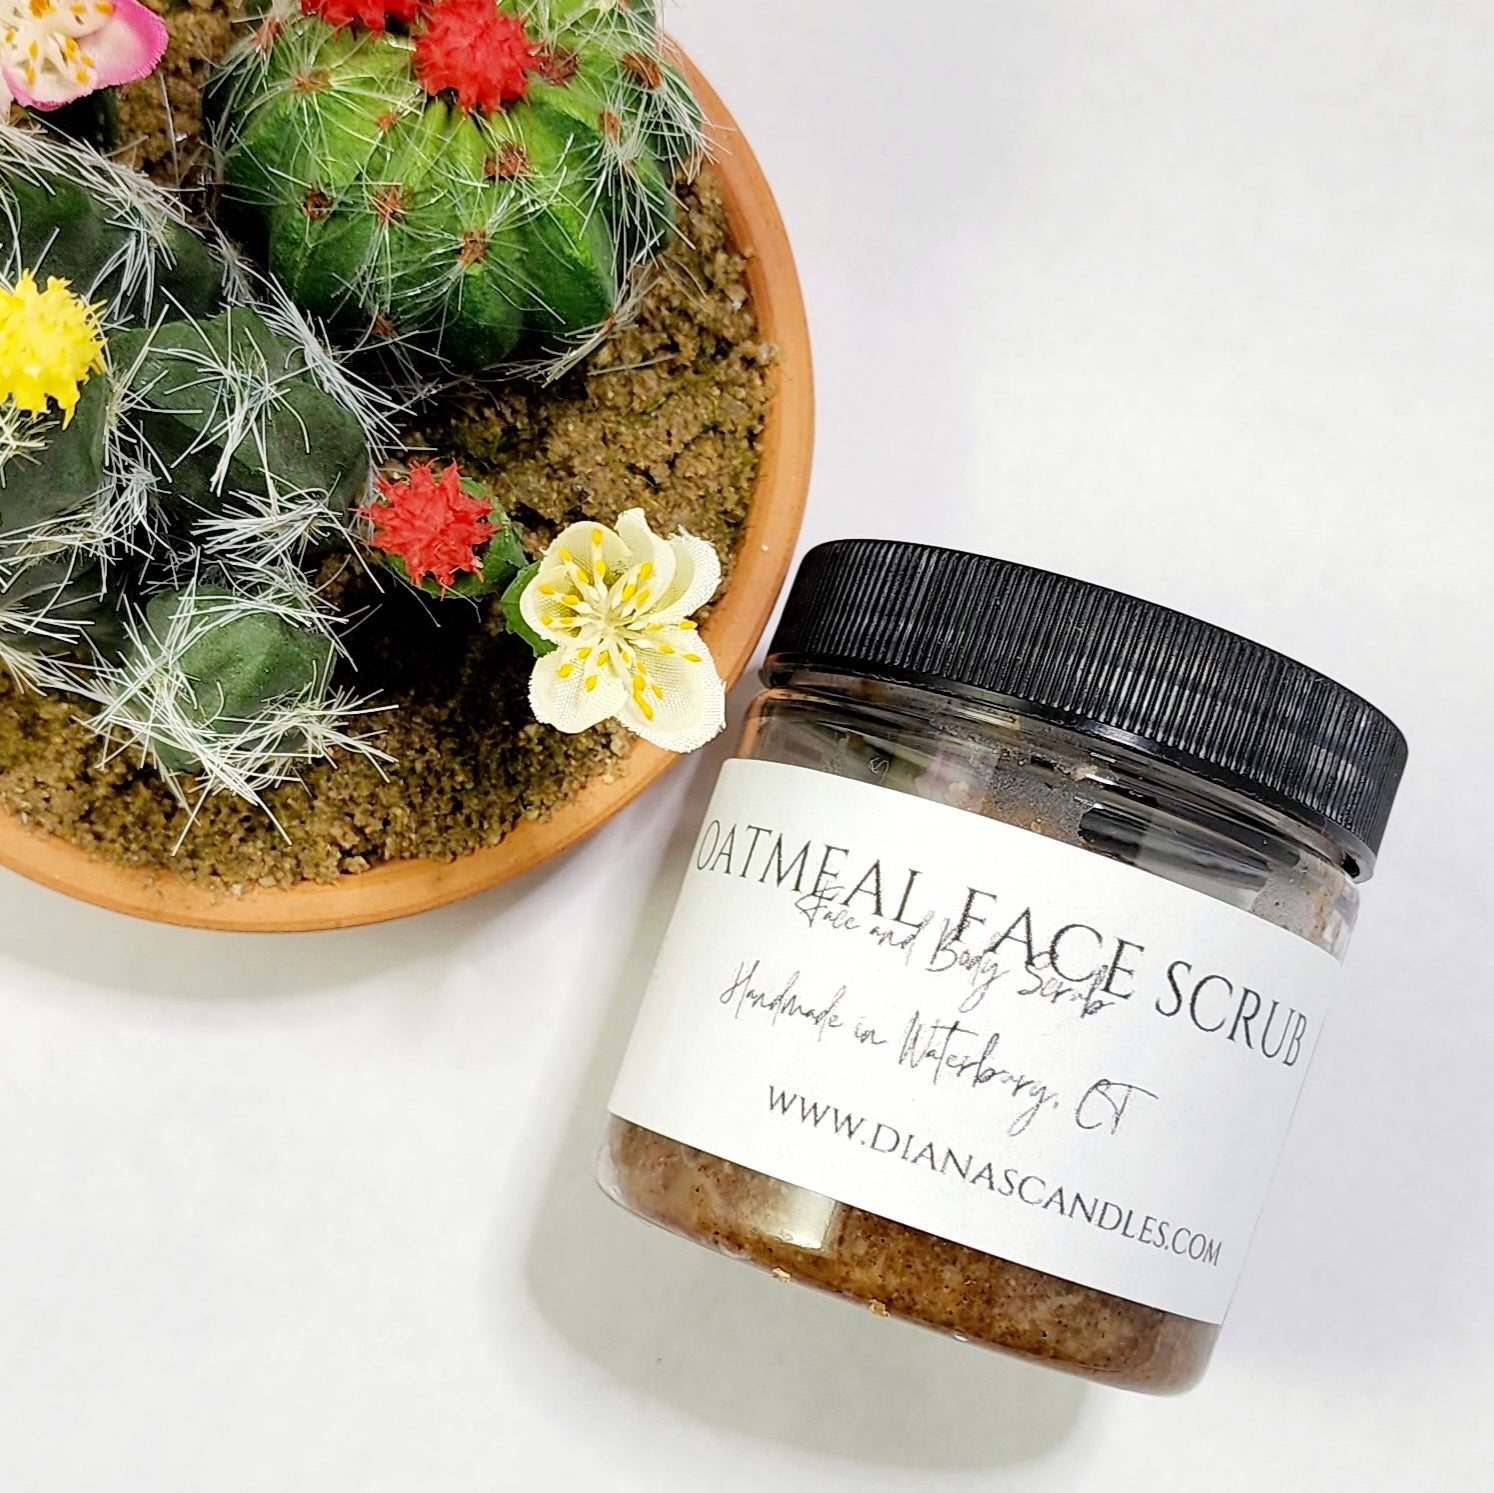 Oatmeal Face Scrub - Diana's Candles and Soaps 